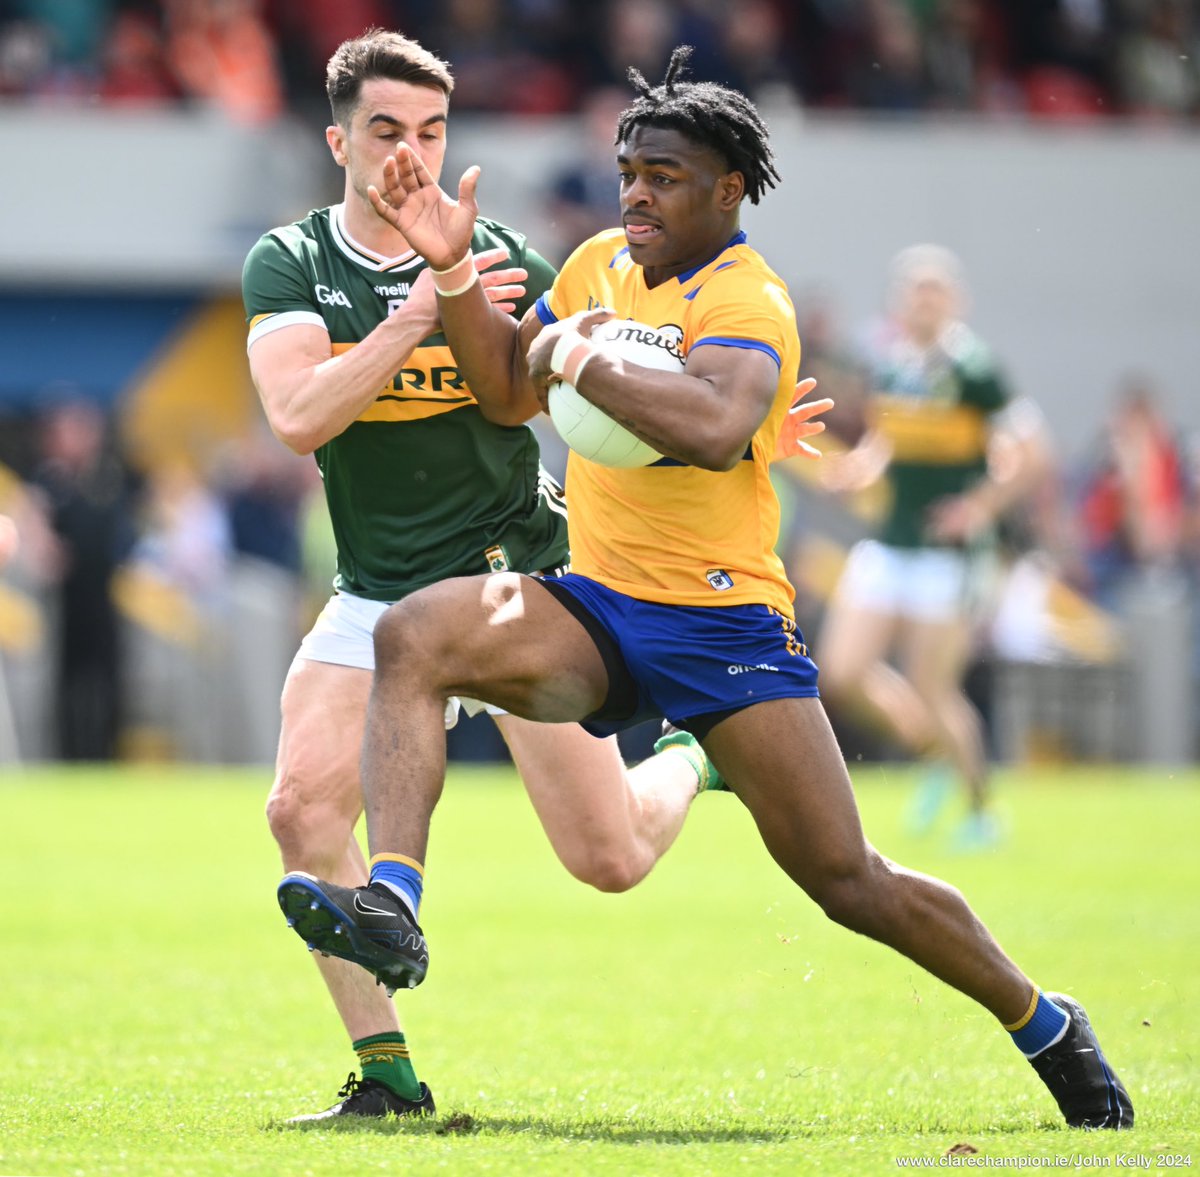 Ikem Ugweru of Clare in action against Brian O Beaglaoich of Kerry during their Munster Senior Football final at Cusack Park. Photograph by John Kelly. The final score is @GaaClare 1-13 , @Kerry_Official 0-23 @MunsterGAA #GAA